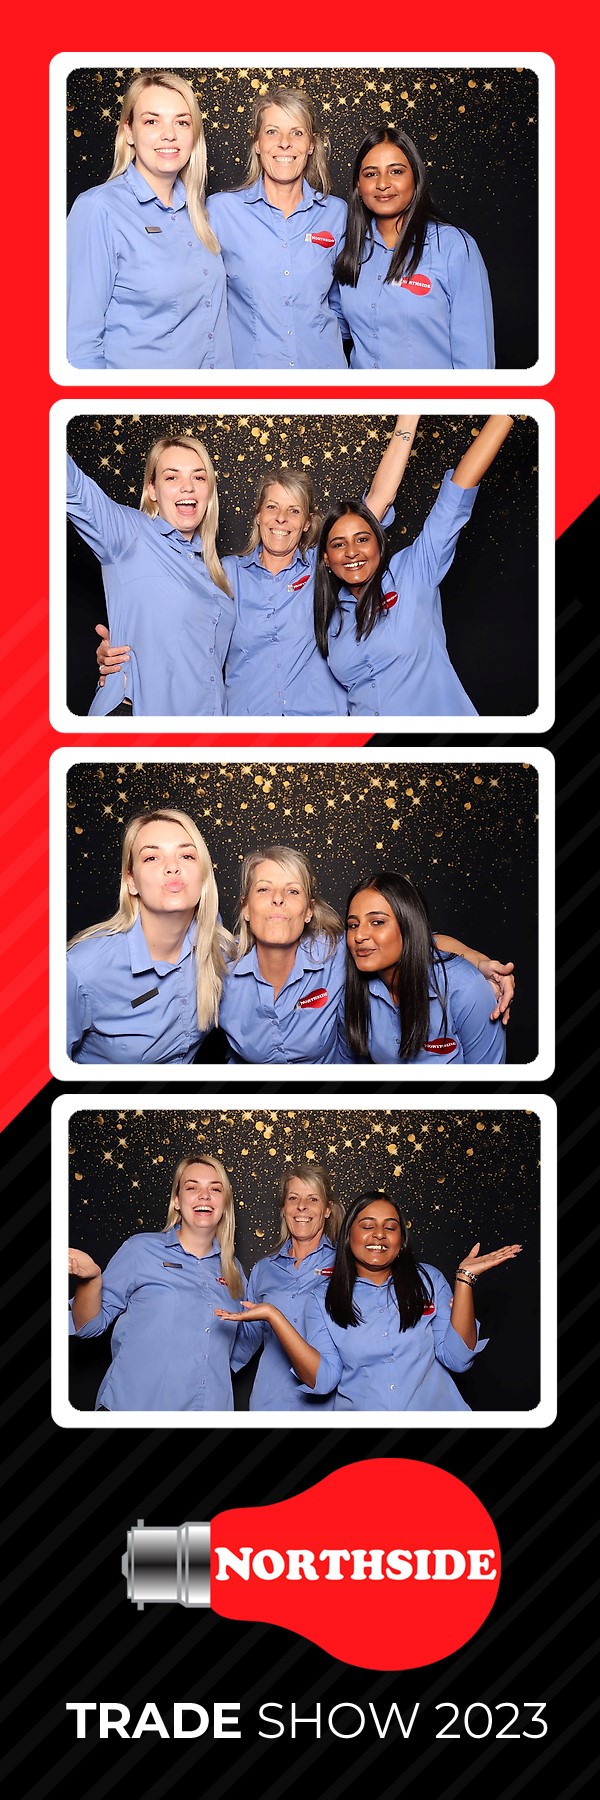 Corporate Photobooths for hire for events in Durban and KZN. Professional Photostrips printed onsite